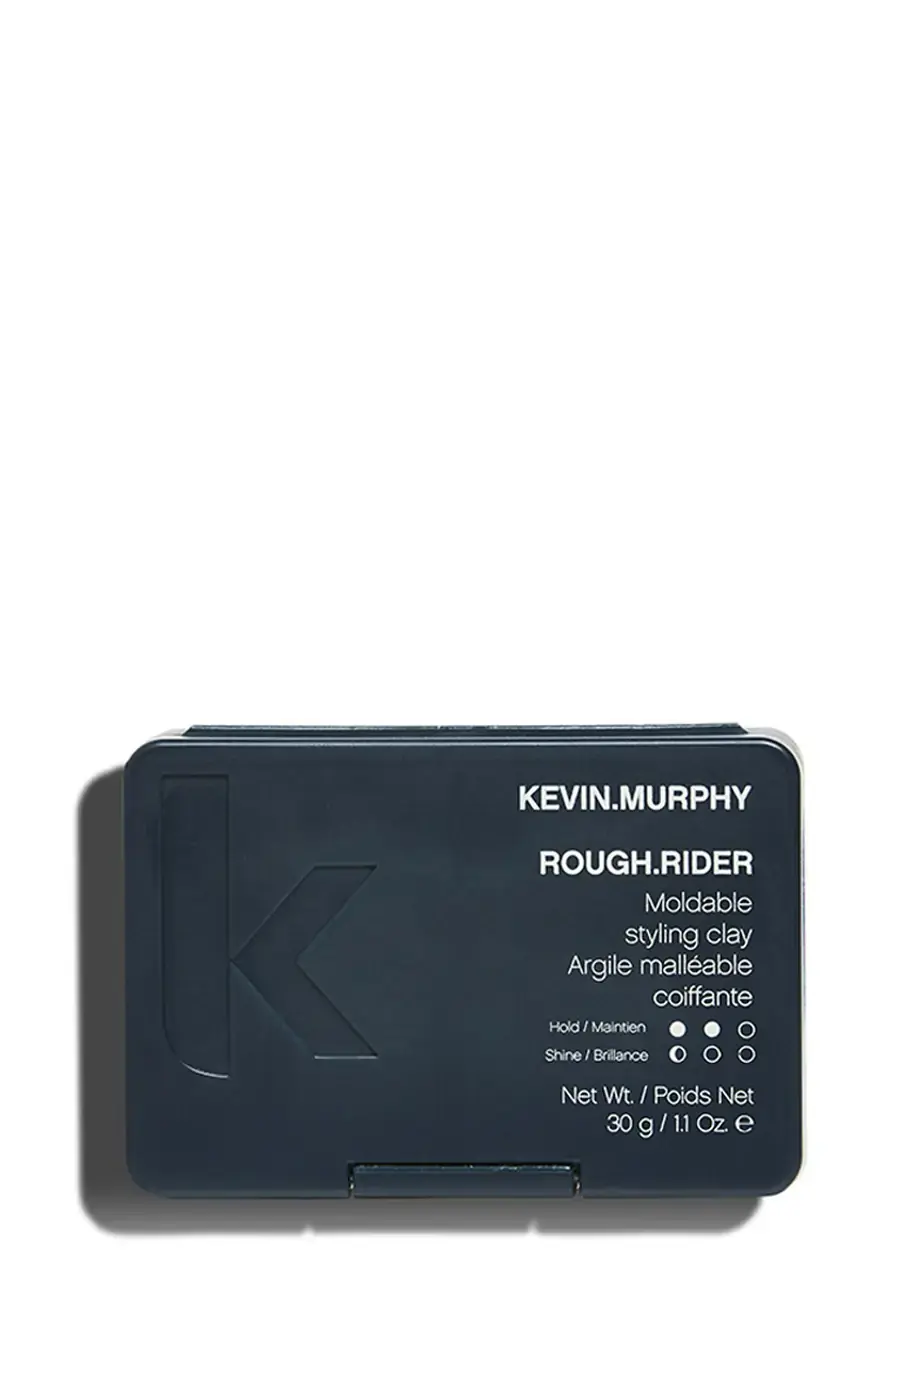 KEVIN.MURPHY Rough.Rider